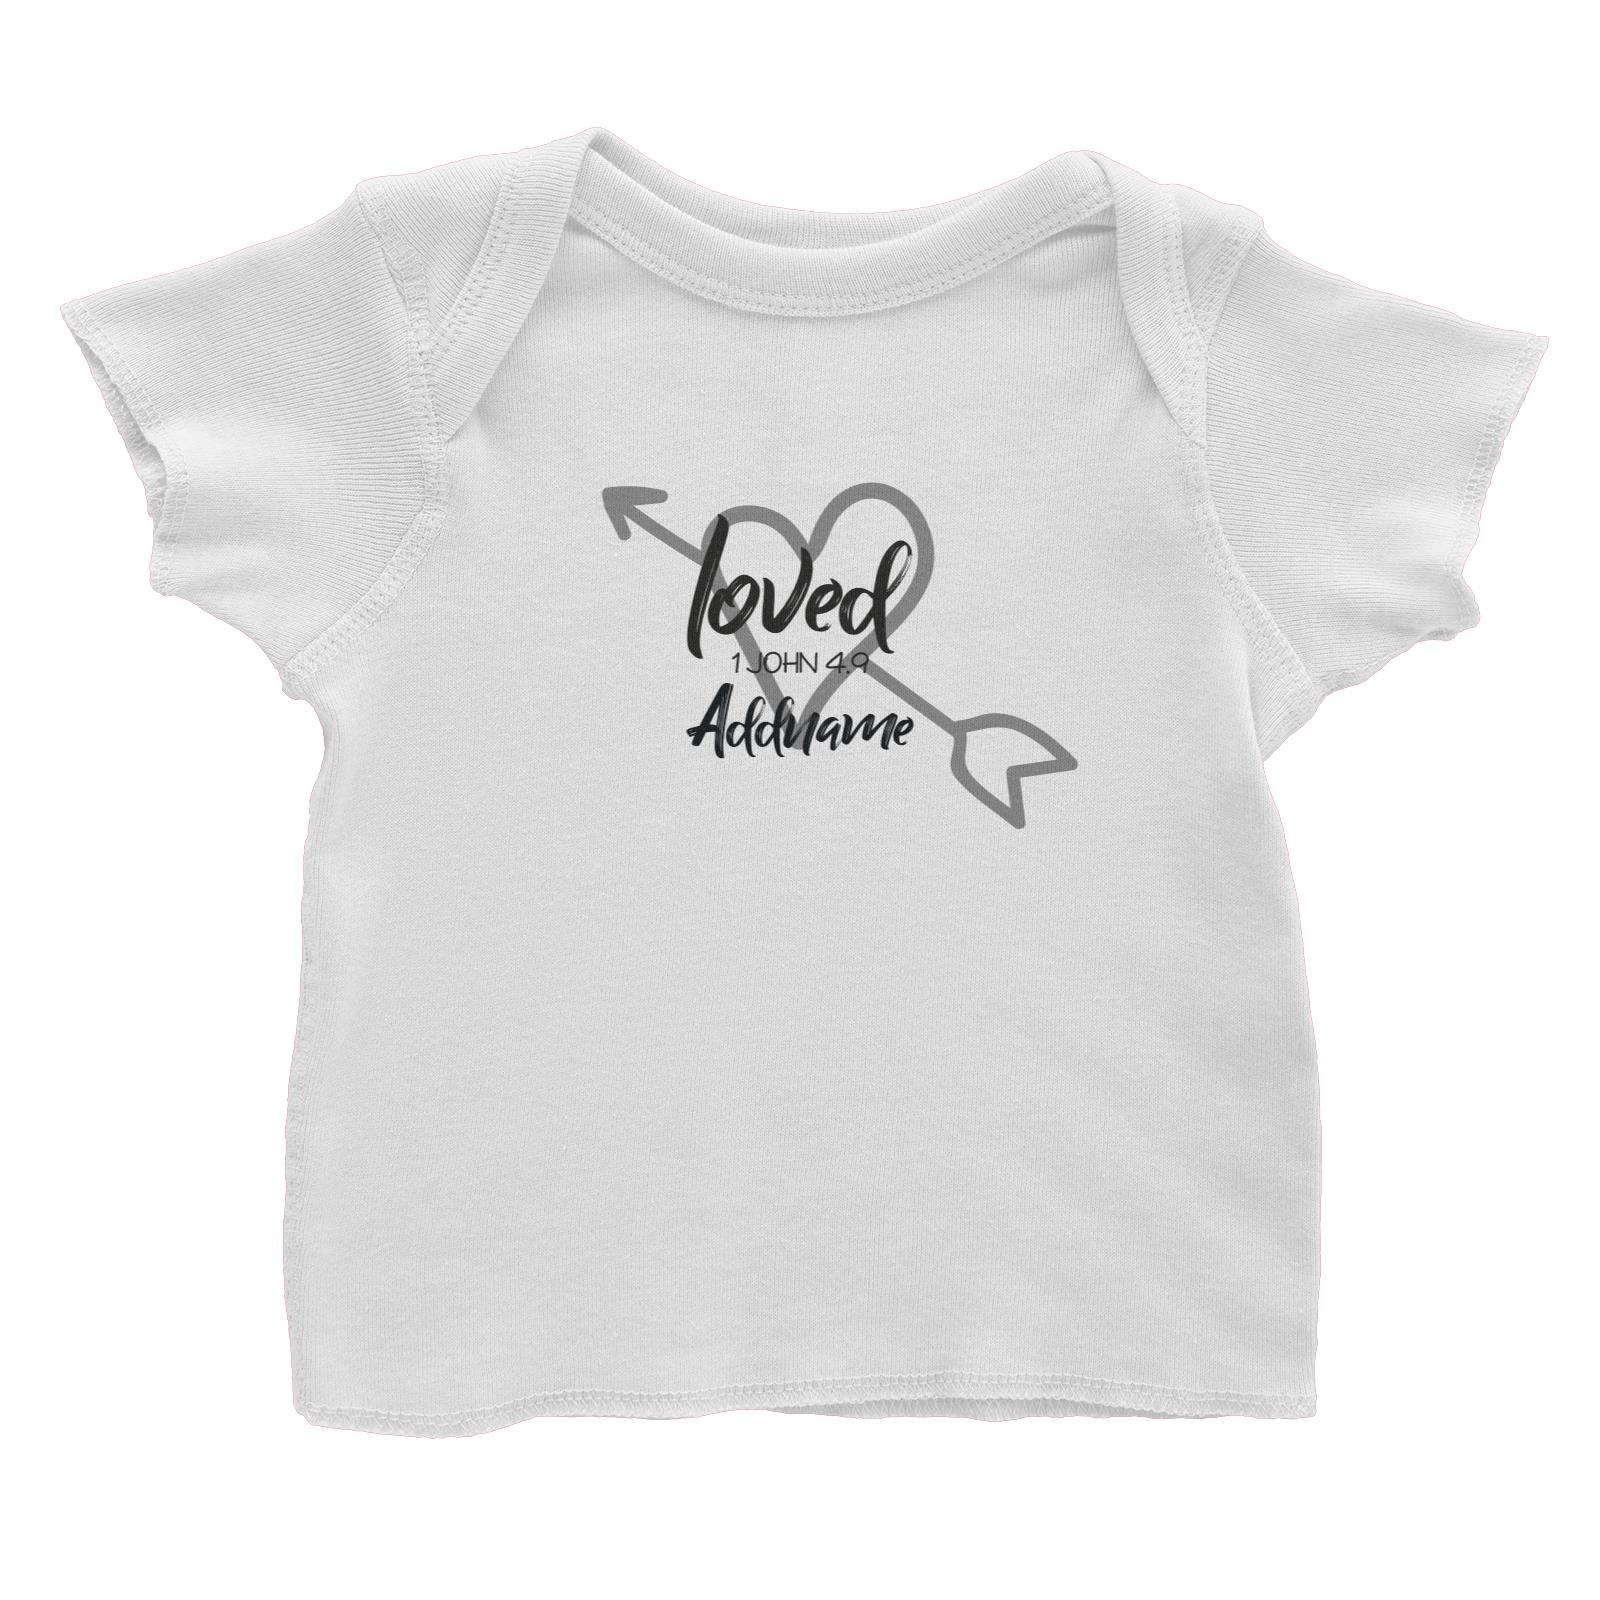 Loved Family Loved With Heart And Arrow 1 John 4.9 Addname Baby T-Shirt